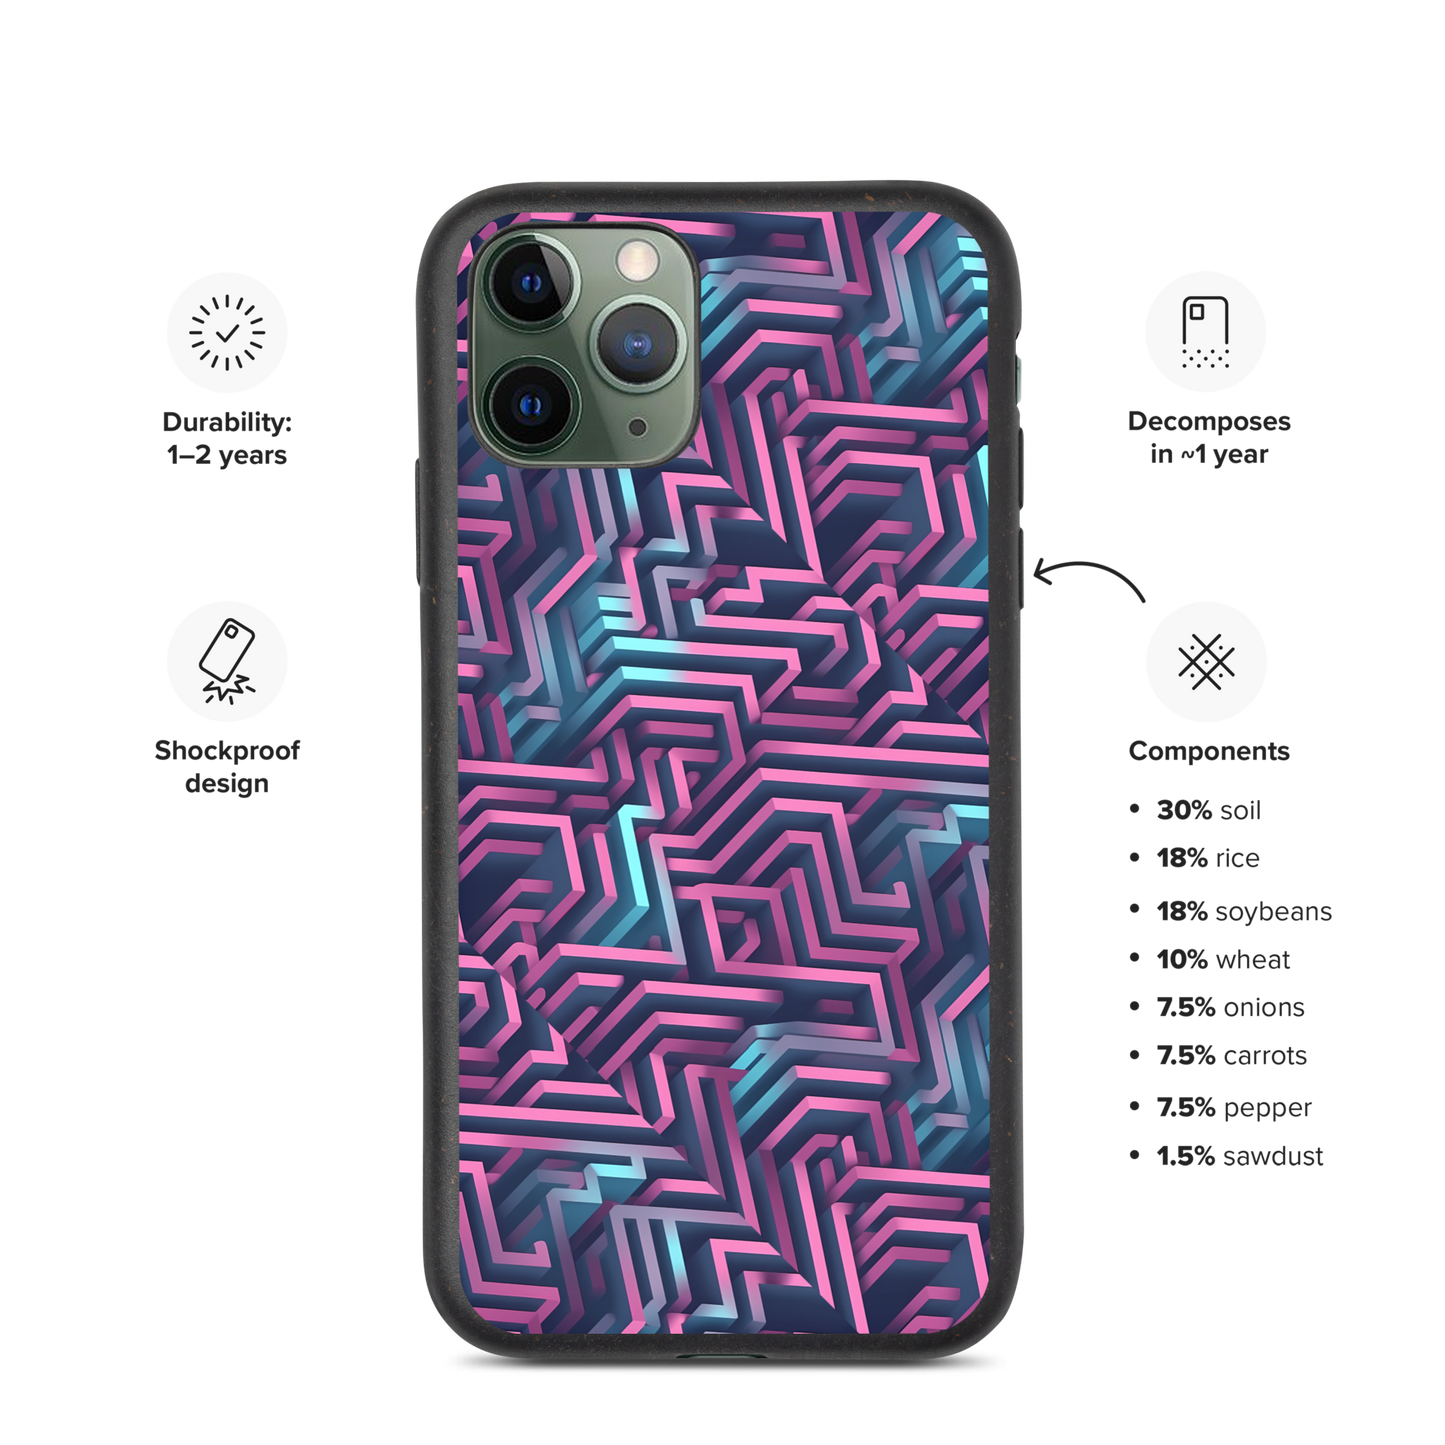 3D Maze Illusion | 3D Patterns | Speckled Case for iPhone - #4